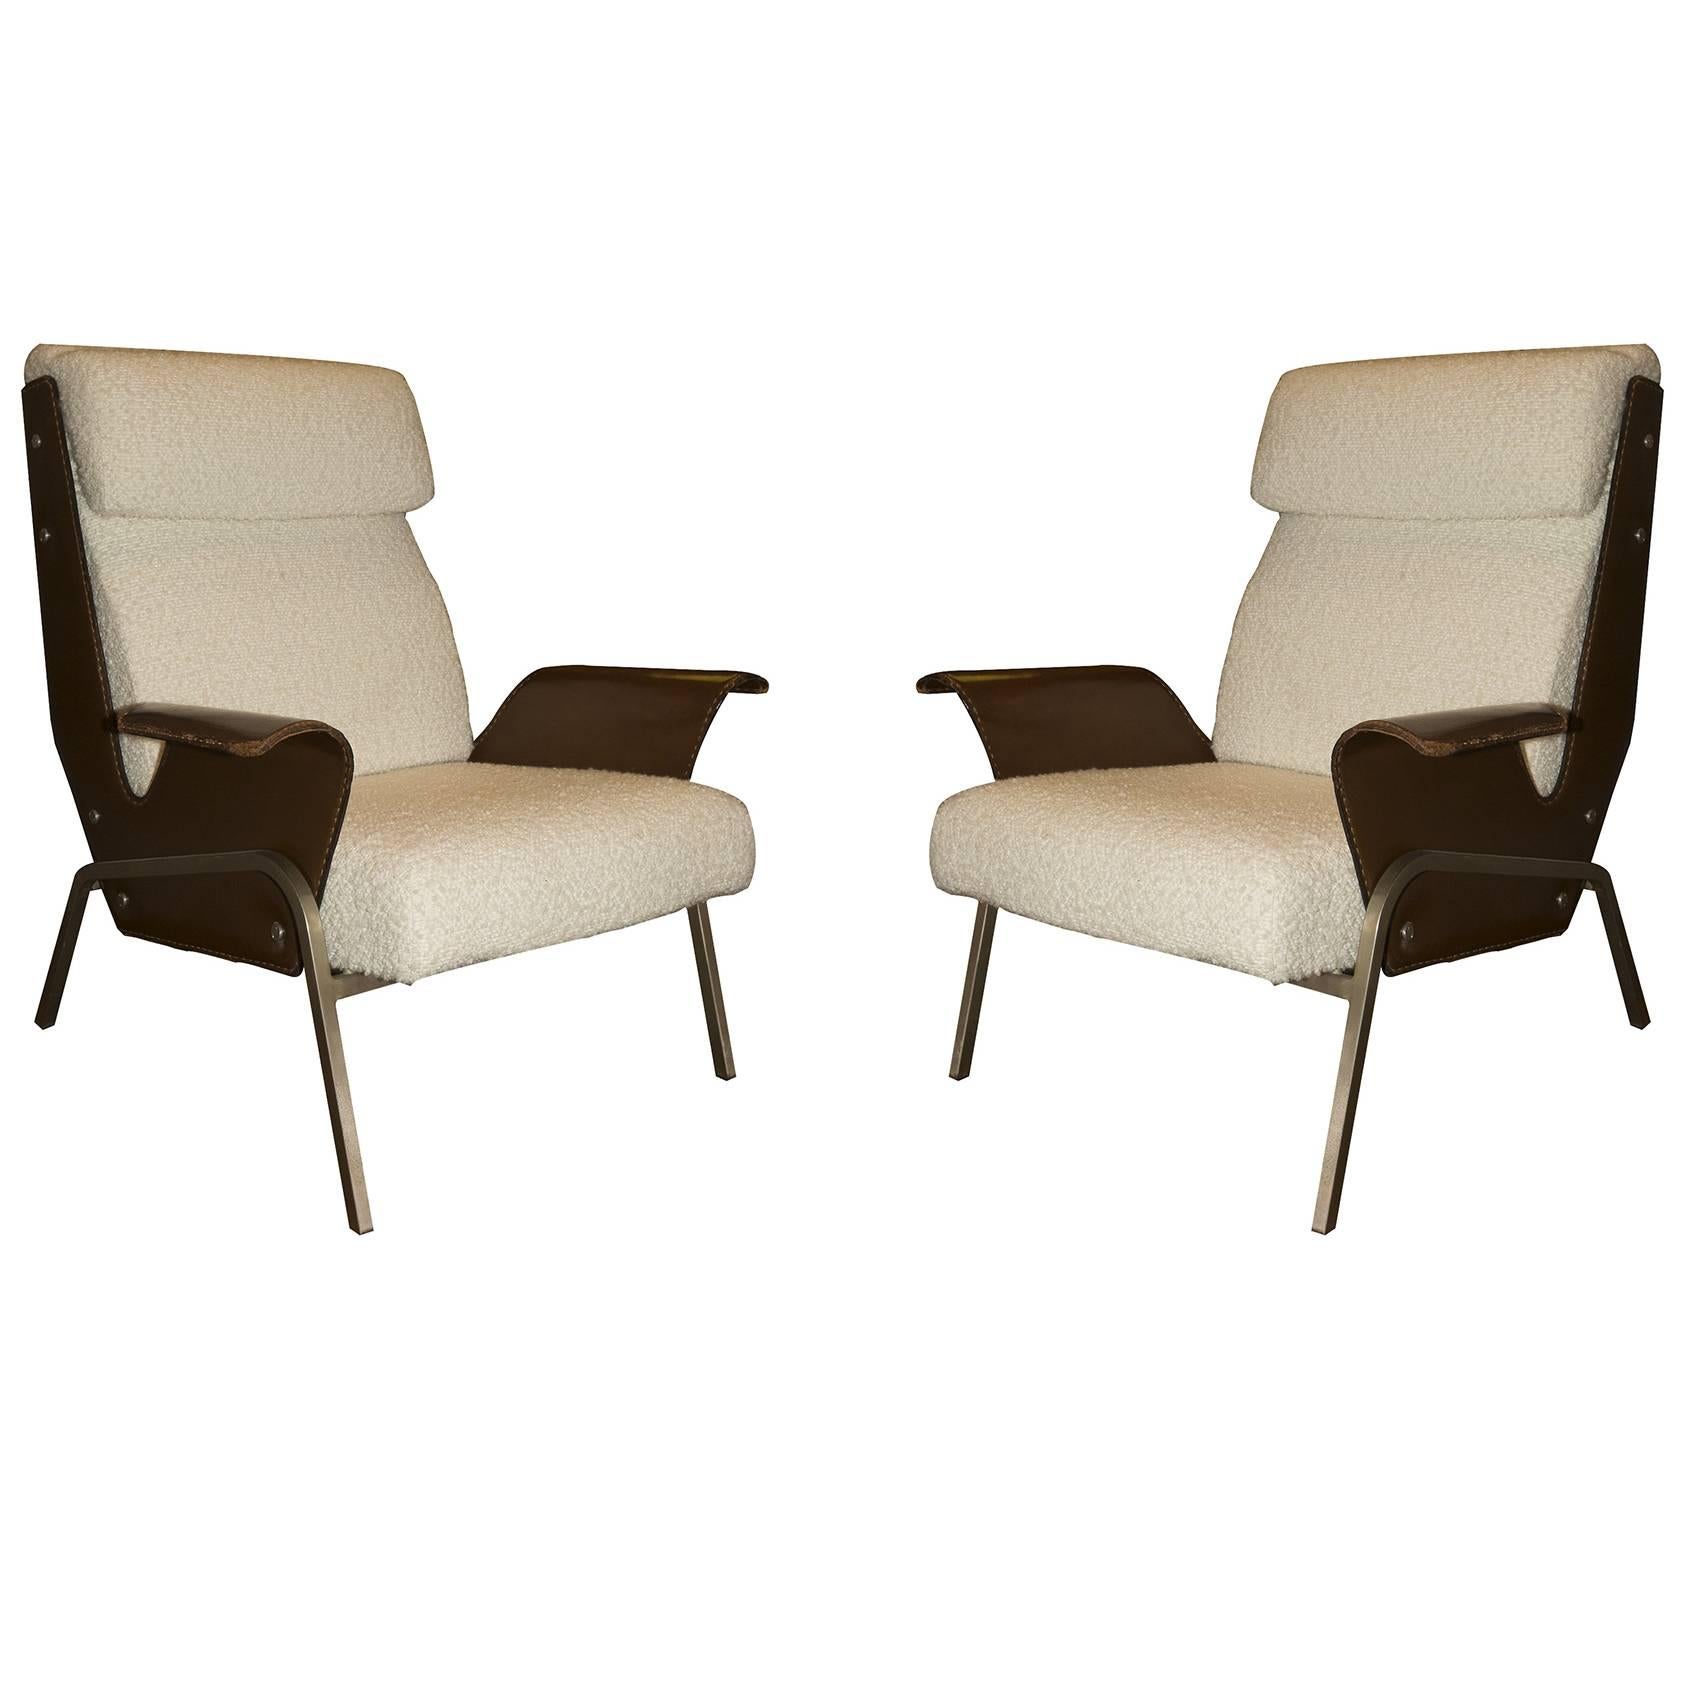 Pair of Alba Lounge Chairs by Gustavo Pulitzer for Arflex, made in Italy, 1959